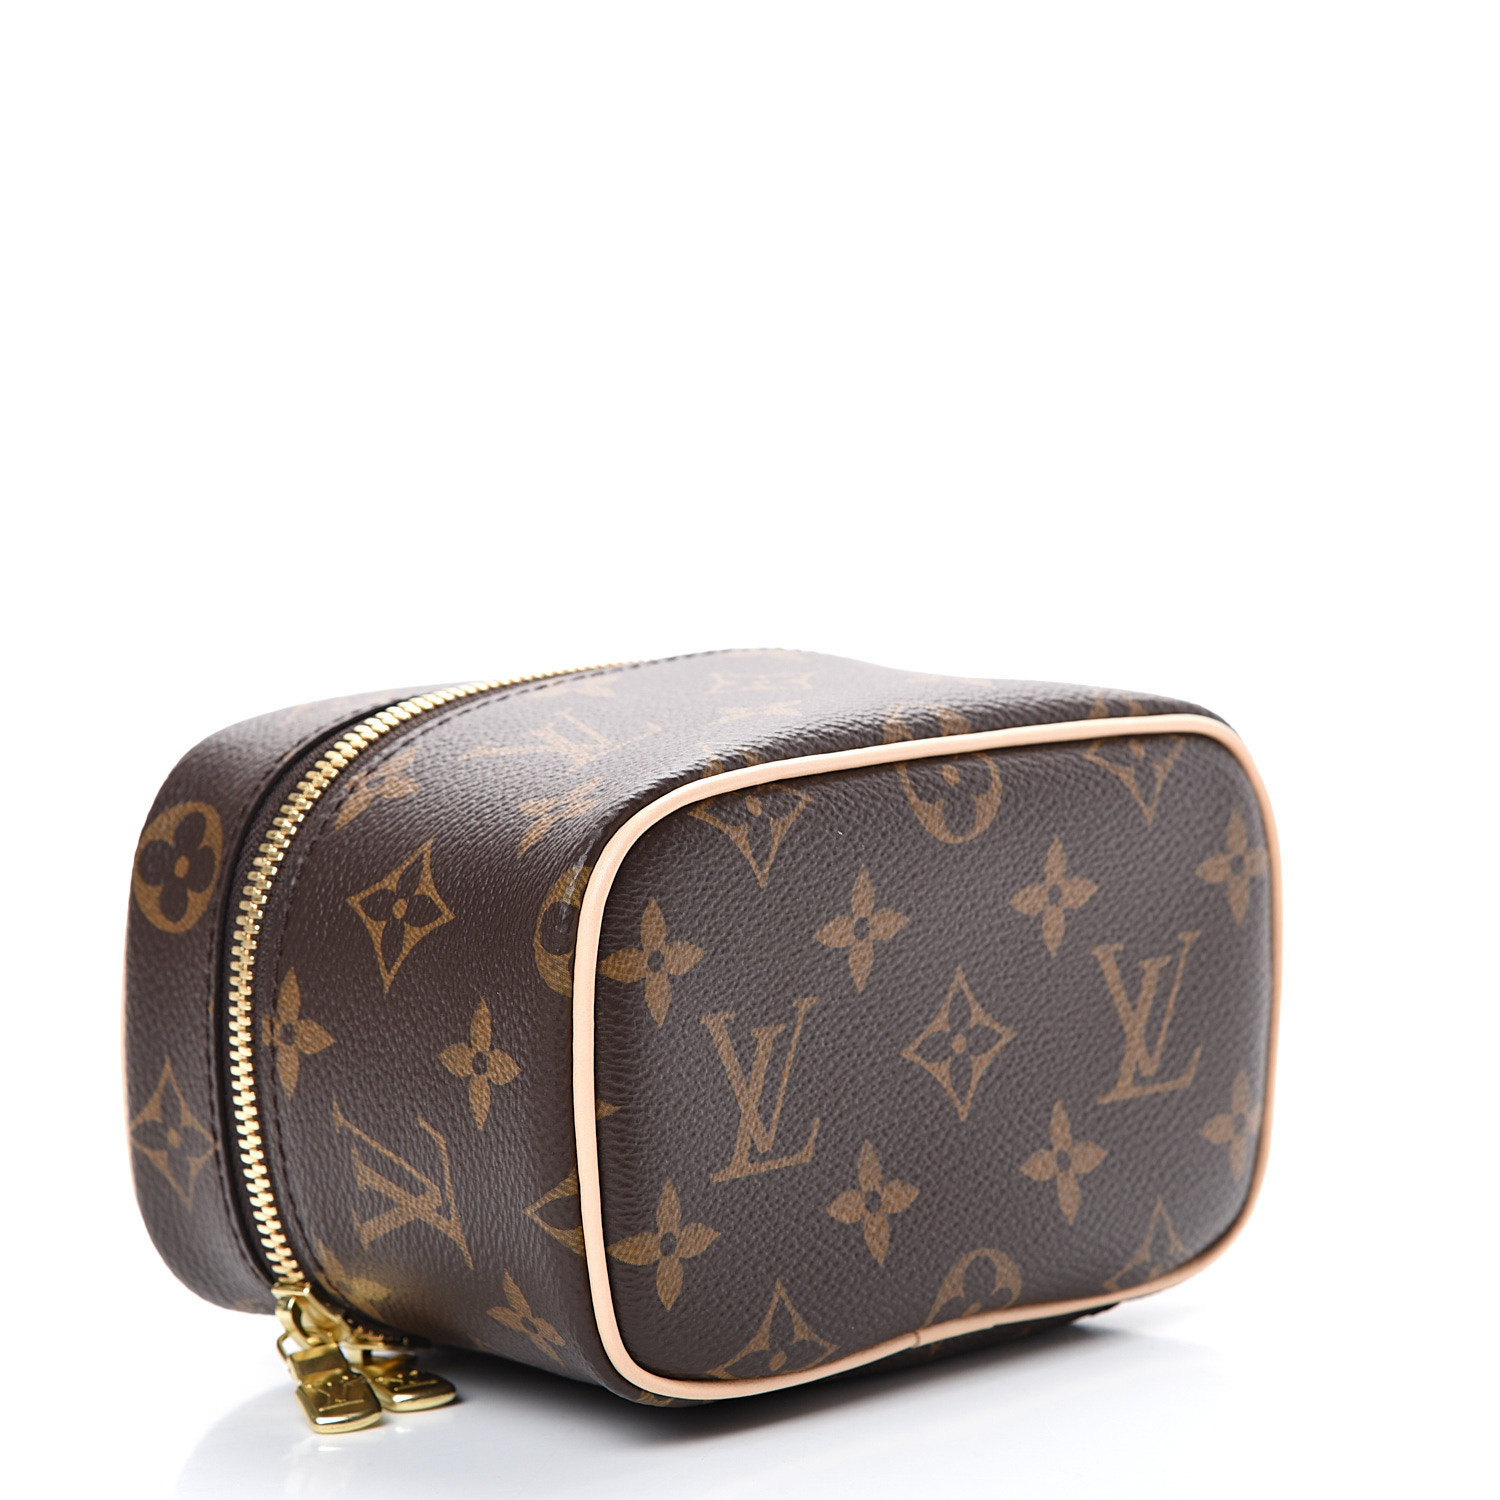 Louis Vuitton Camera Bag - 8 For Sale on 1stDibs  louis vuitton vintage  camera bag, lv vintage camera bag, louis vuitton monogram camera bag